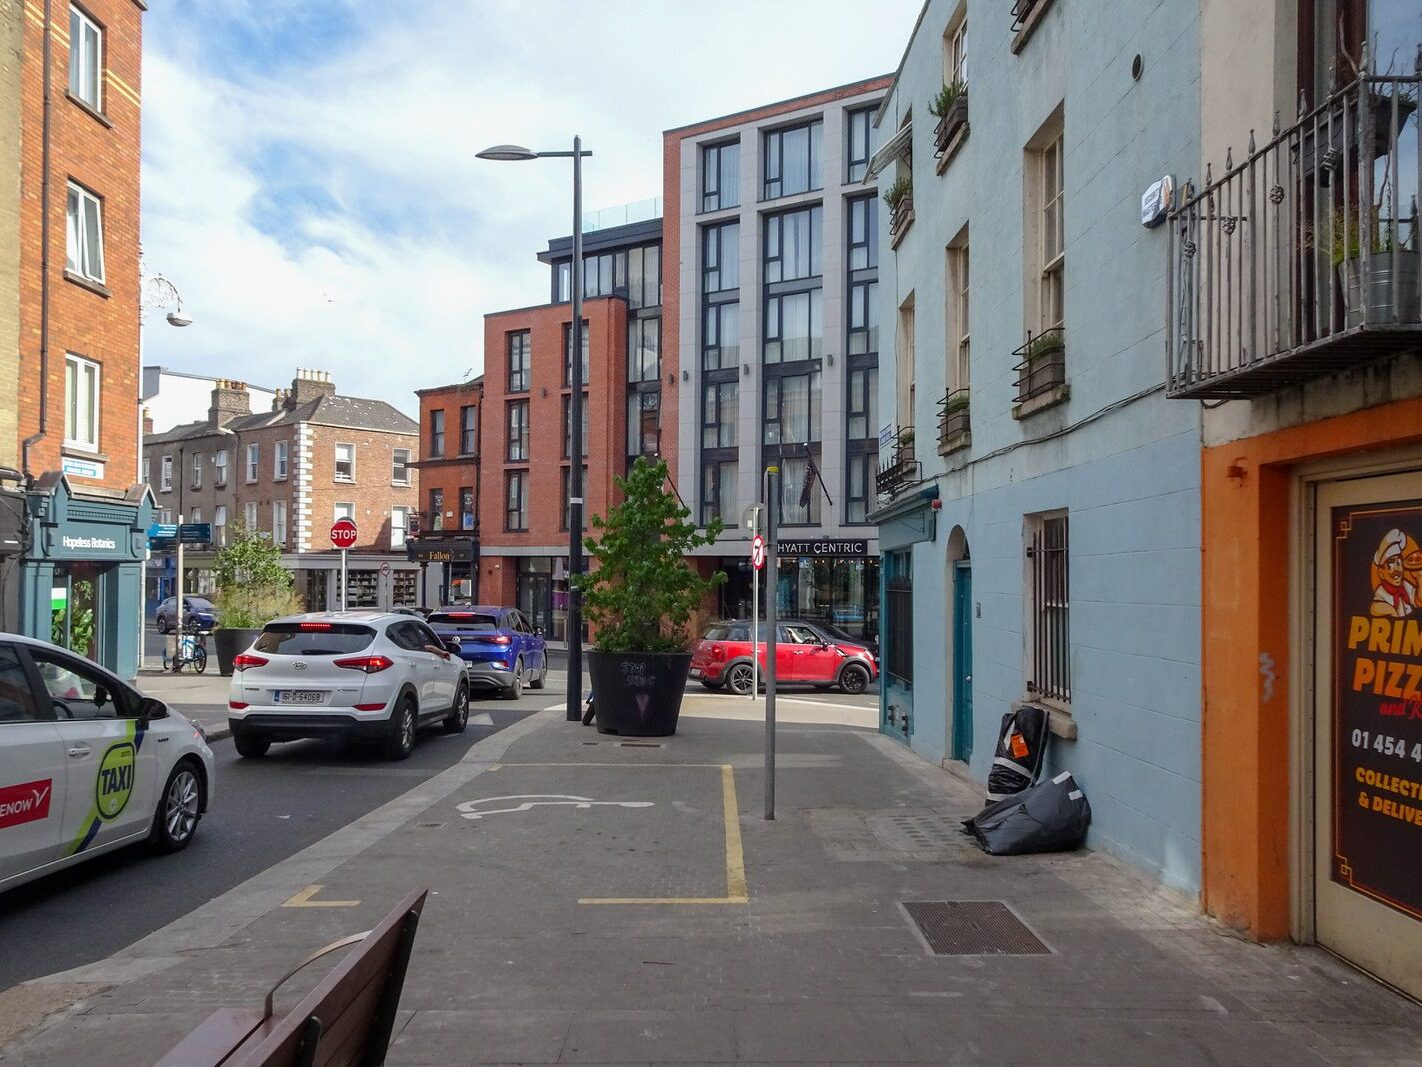 THE FRANCIS STREET UPGRADE HAS BEEN A HUGE A SUCCESS [MEATH STREET IS NEXT FOR AN UPGRADE]-236803-1